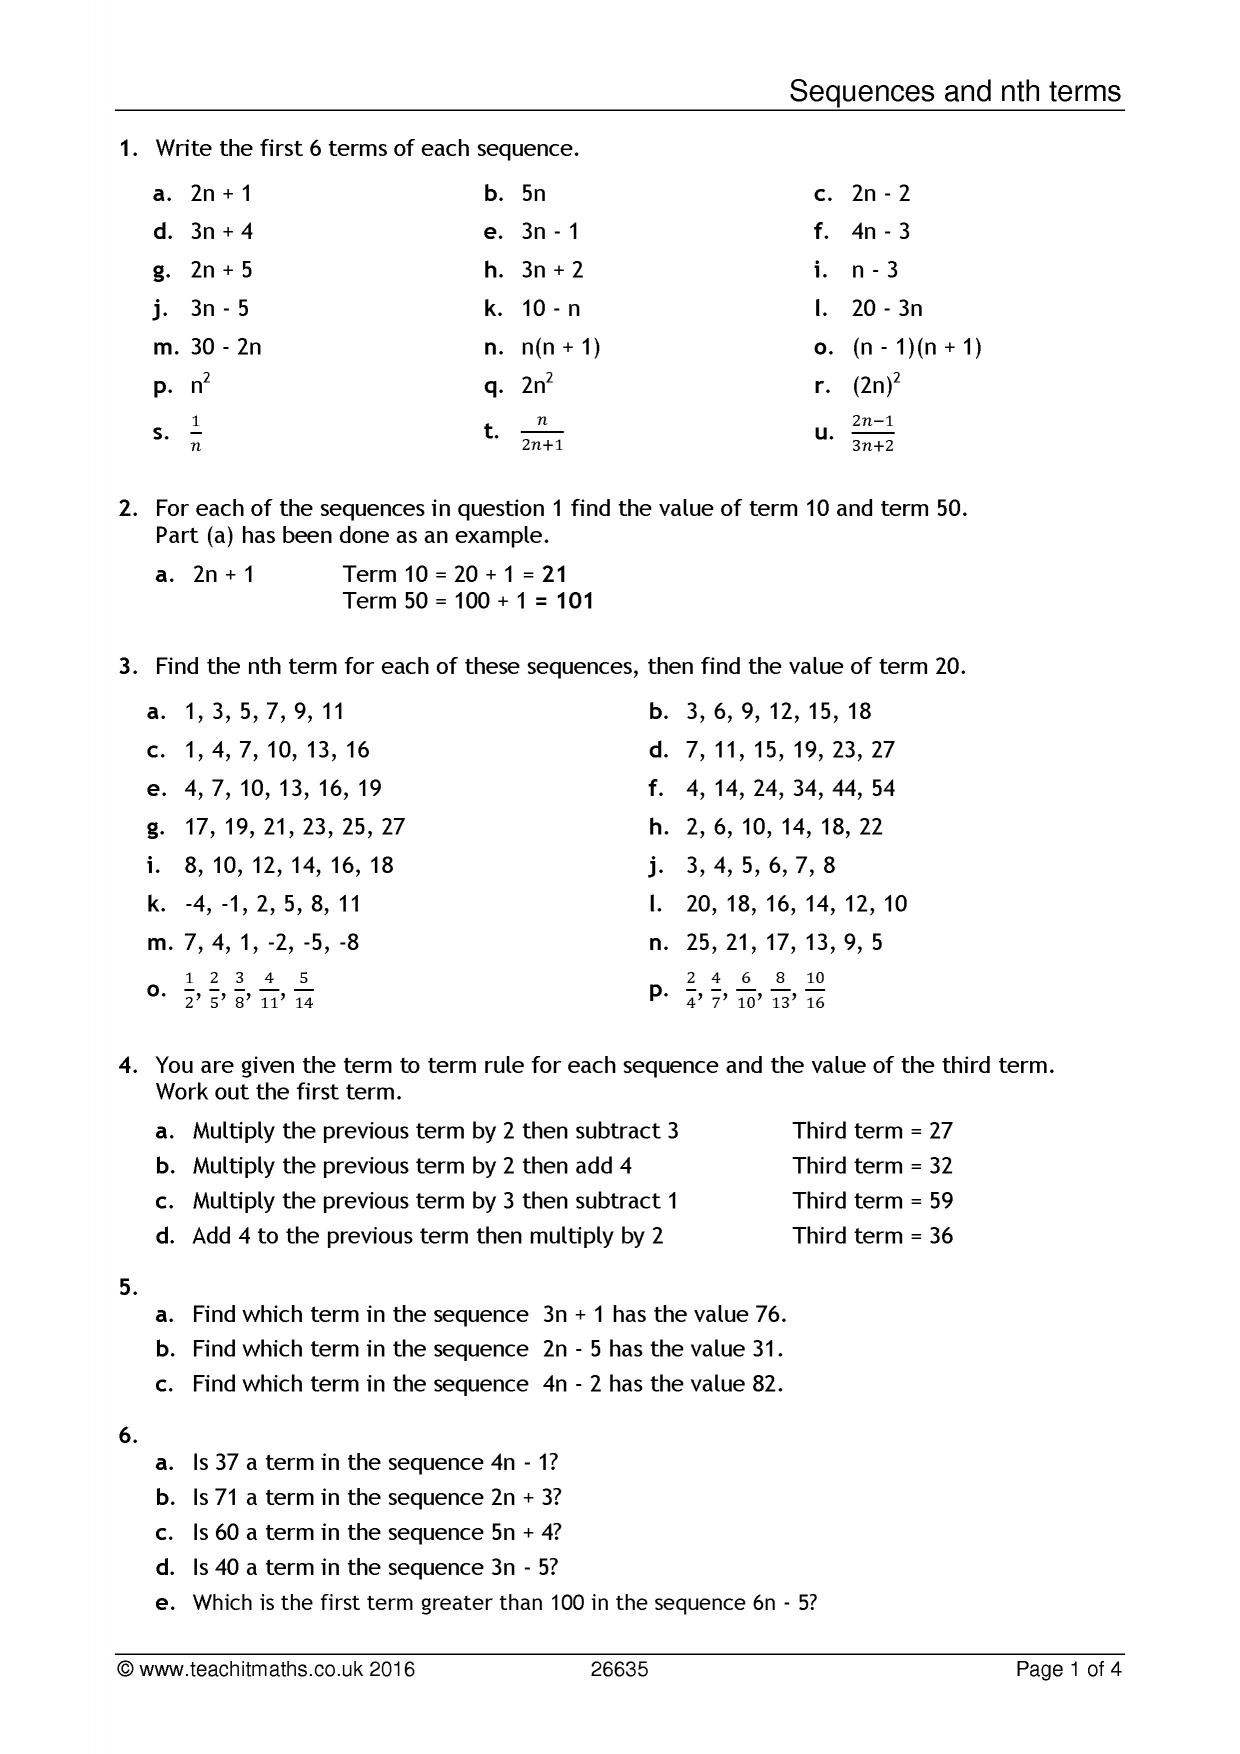 Sequence Worksheets 3rd Grade Sequences and Nth Terms Worksheet [pdf] Teachit Maths